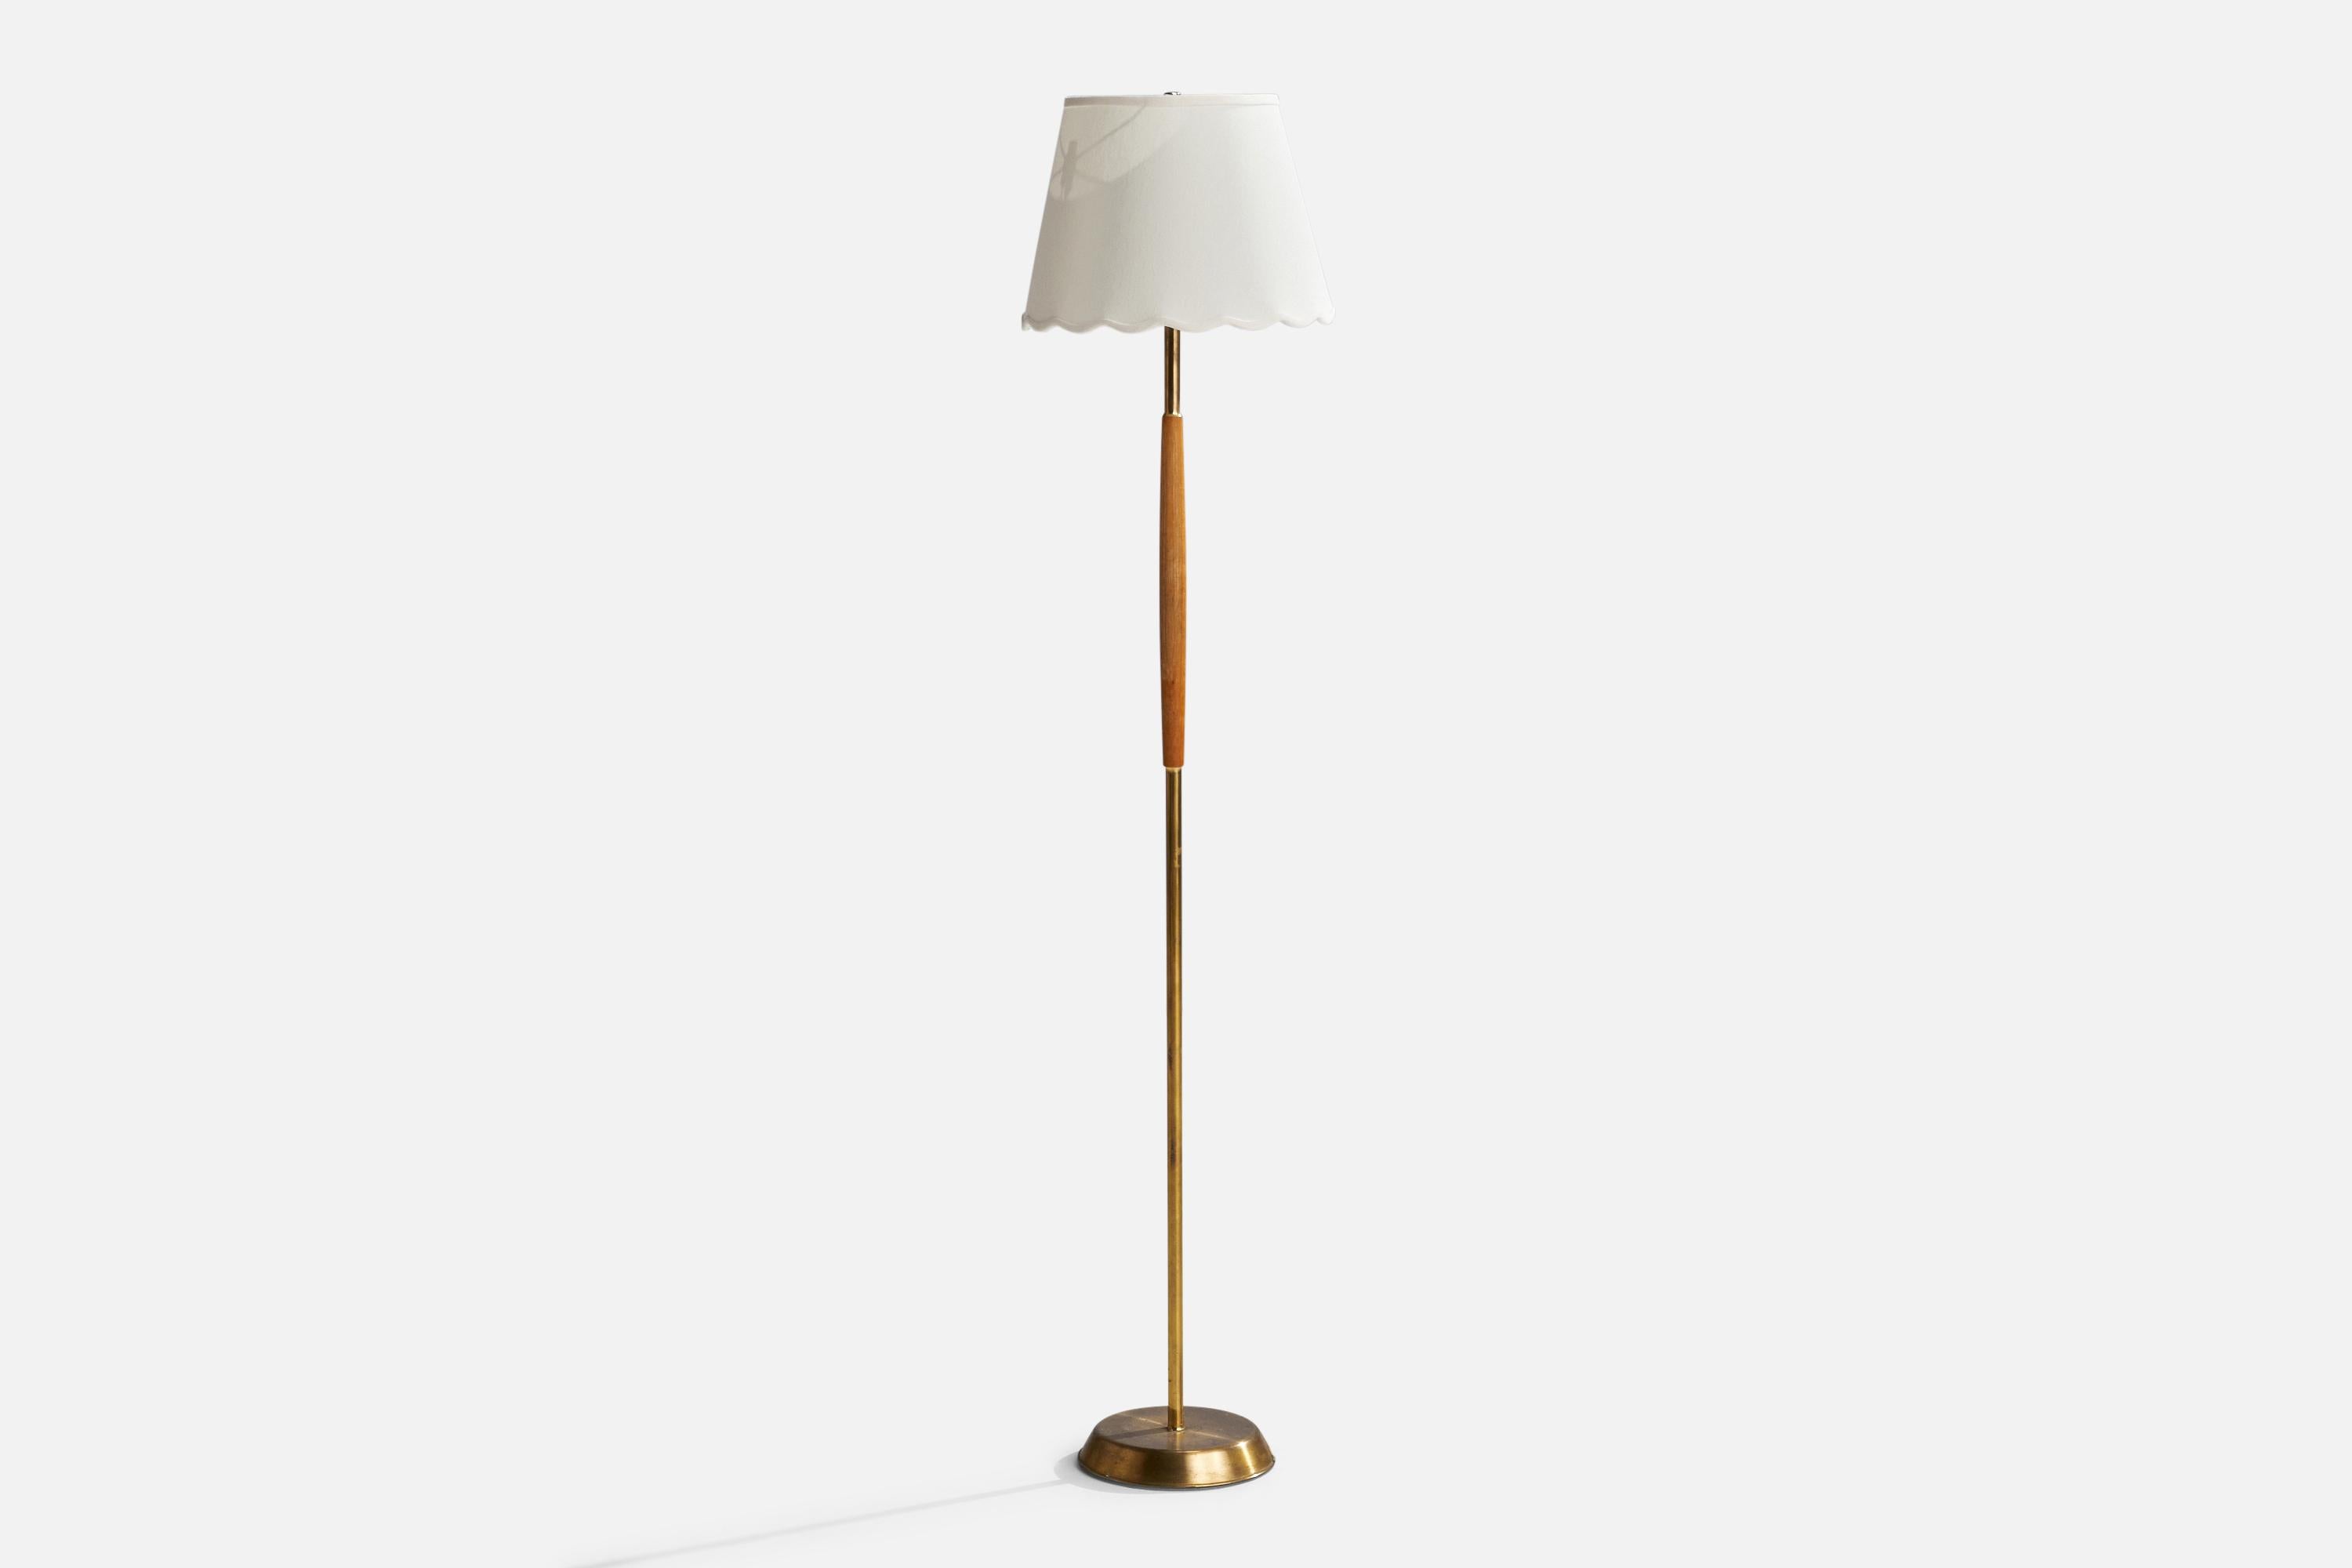 An oak, brass and fabric floor lamp designed and produced in Sweden, 1950s.

Overall Dimensions (inches): 55”  H x 12”  W x 13” D
Stated dimensions include shade.
Bulb Specifications: E-26 Bulb
Number of Sockets: 1
All lighting will be converted for